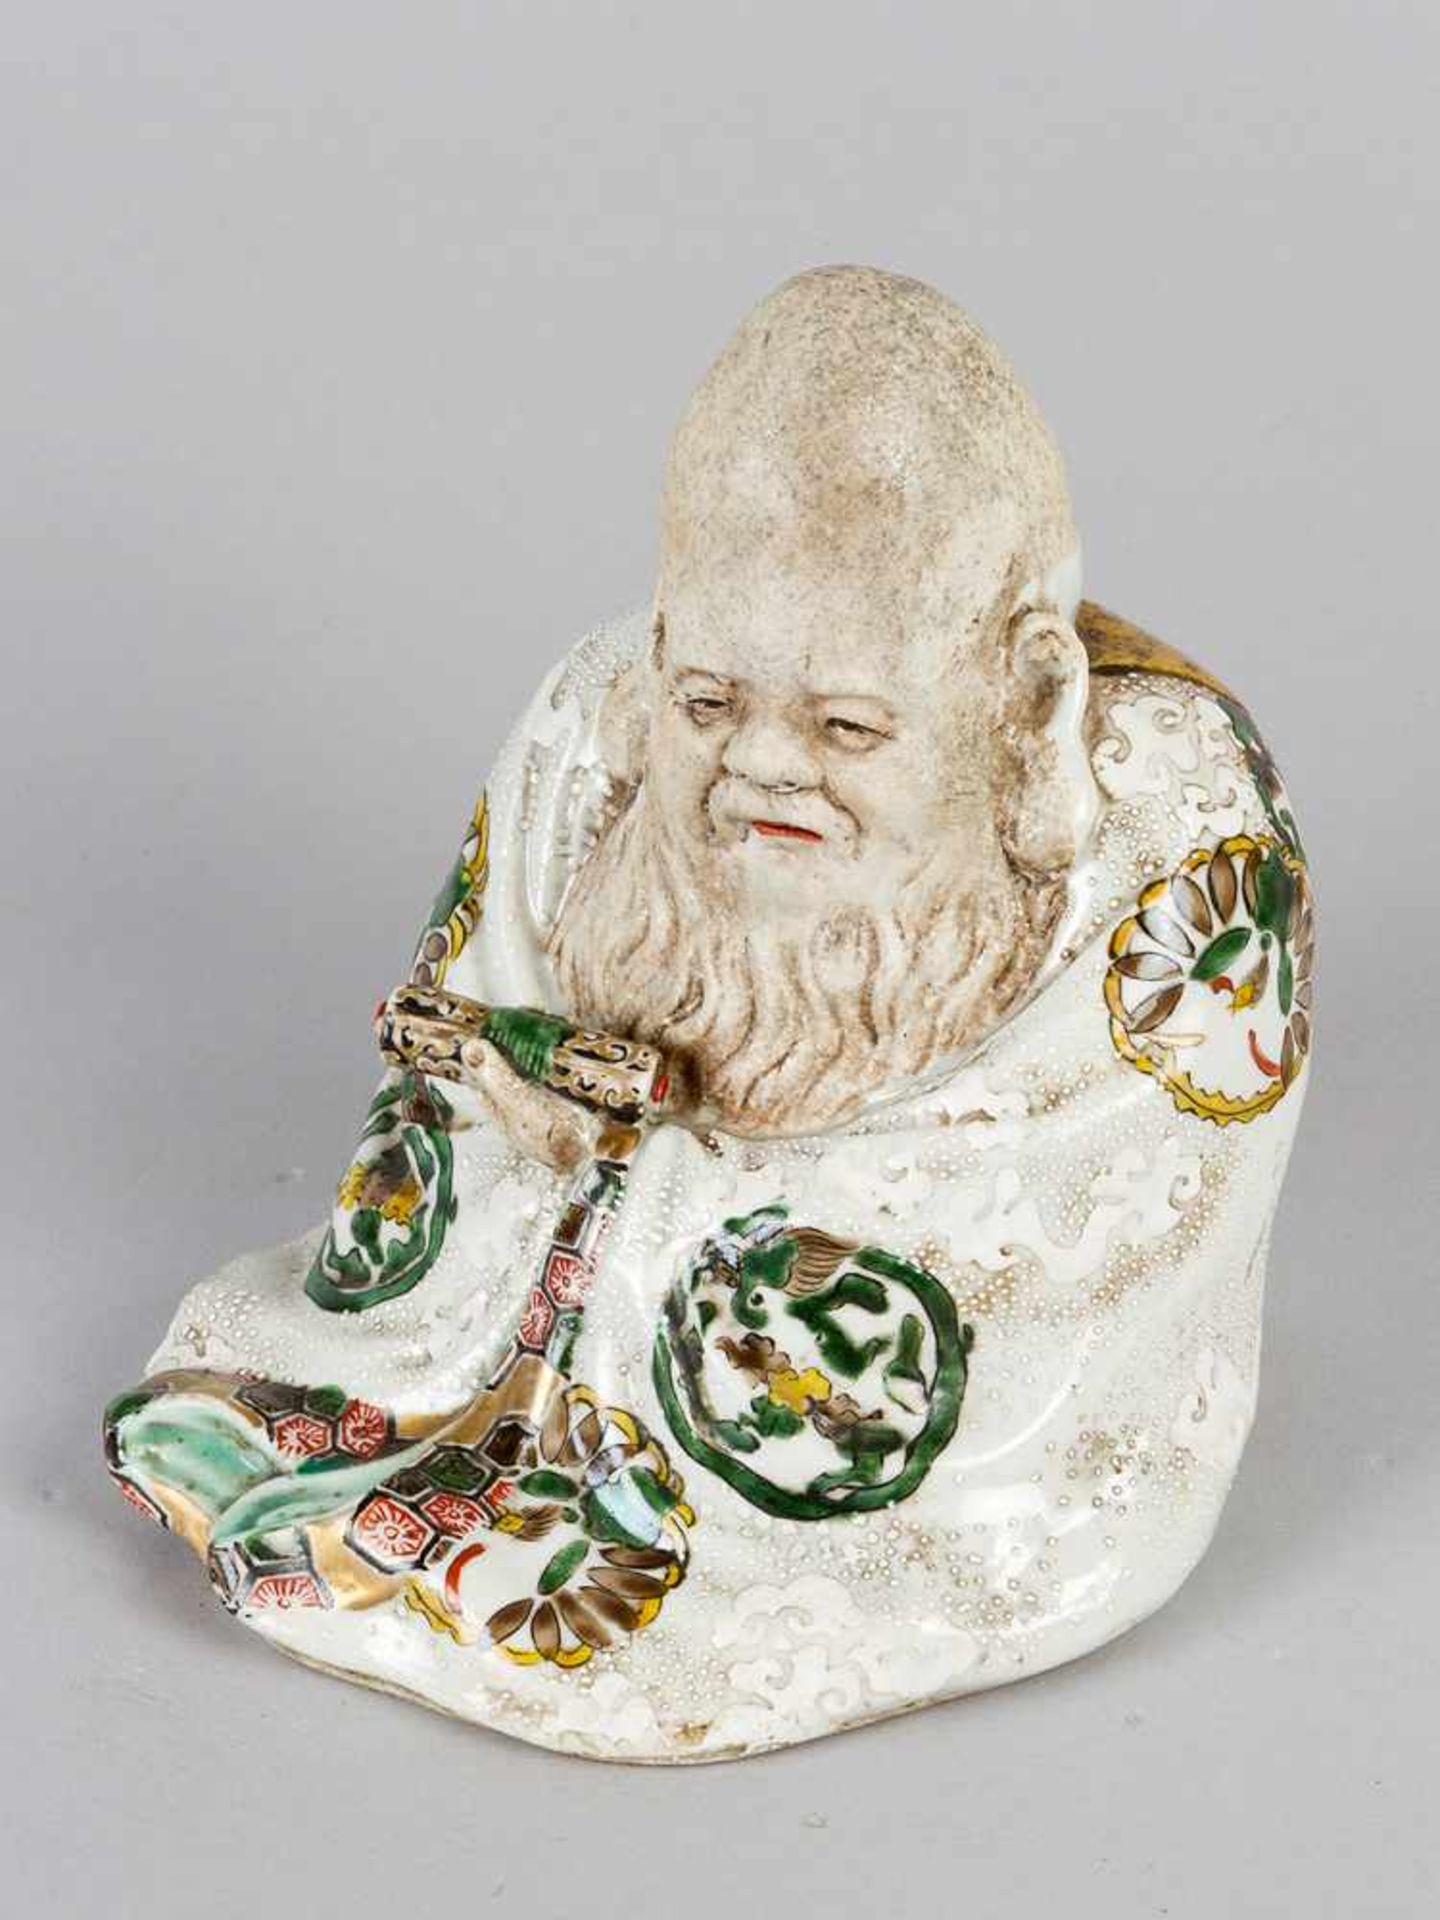 Chinese Porcelain figure of a wise men with script-role and coat, partly painted and glazed. 19th